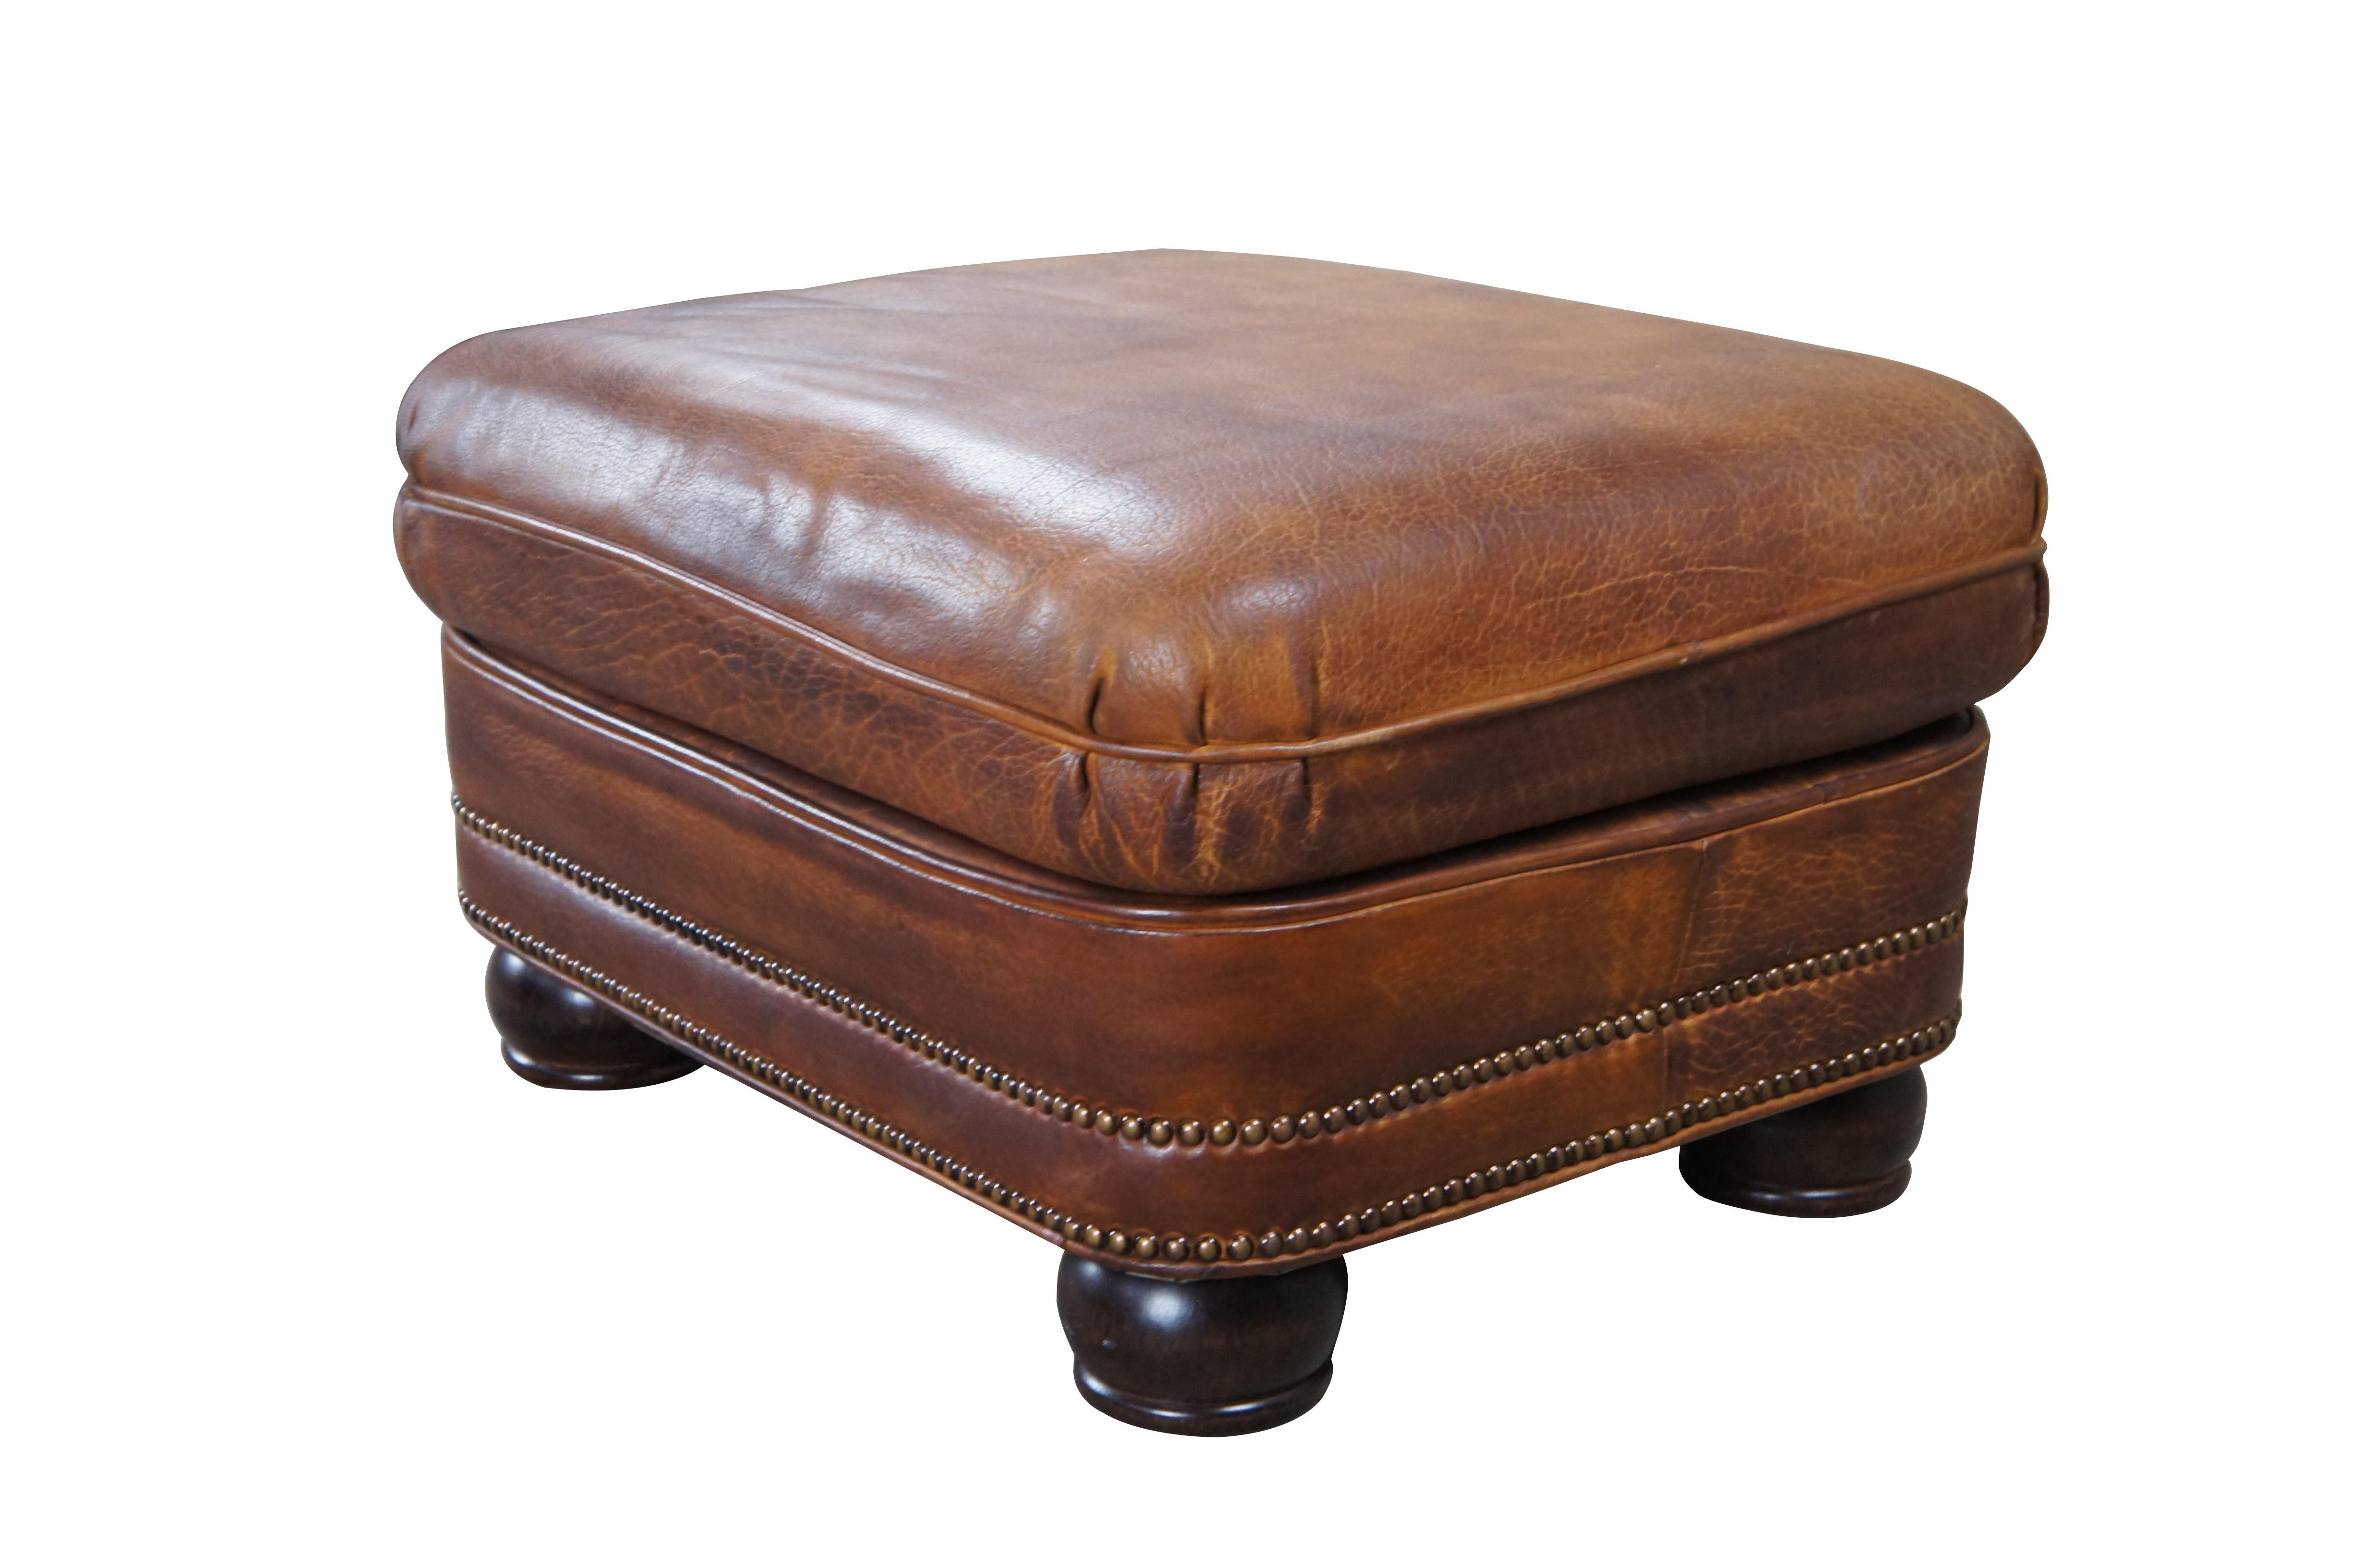 Beautiful pair of Hancock & Moore Austin Traditional Ottomans. Upholstered a rich top grain brown leather with brass nailhead trim. The rectangular form features a cushioned top and robust bun feet.

Dimensions:
23